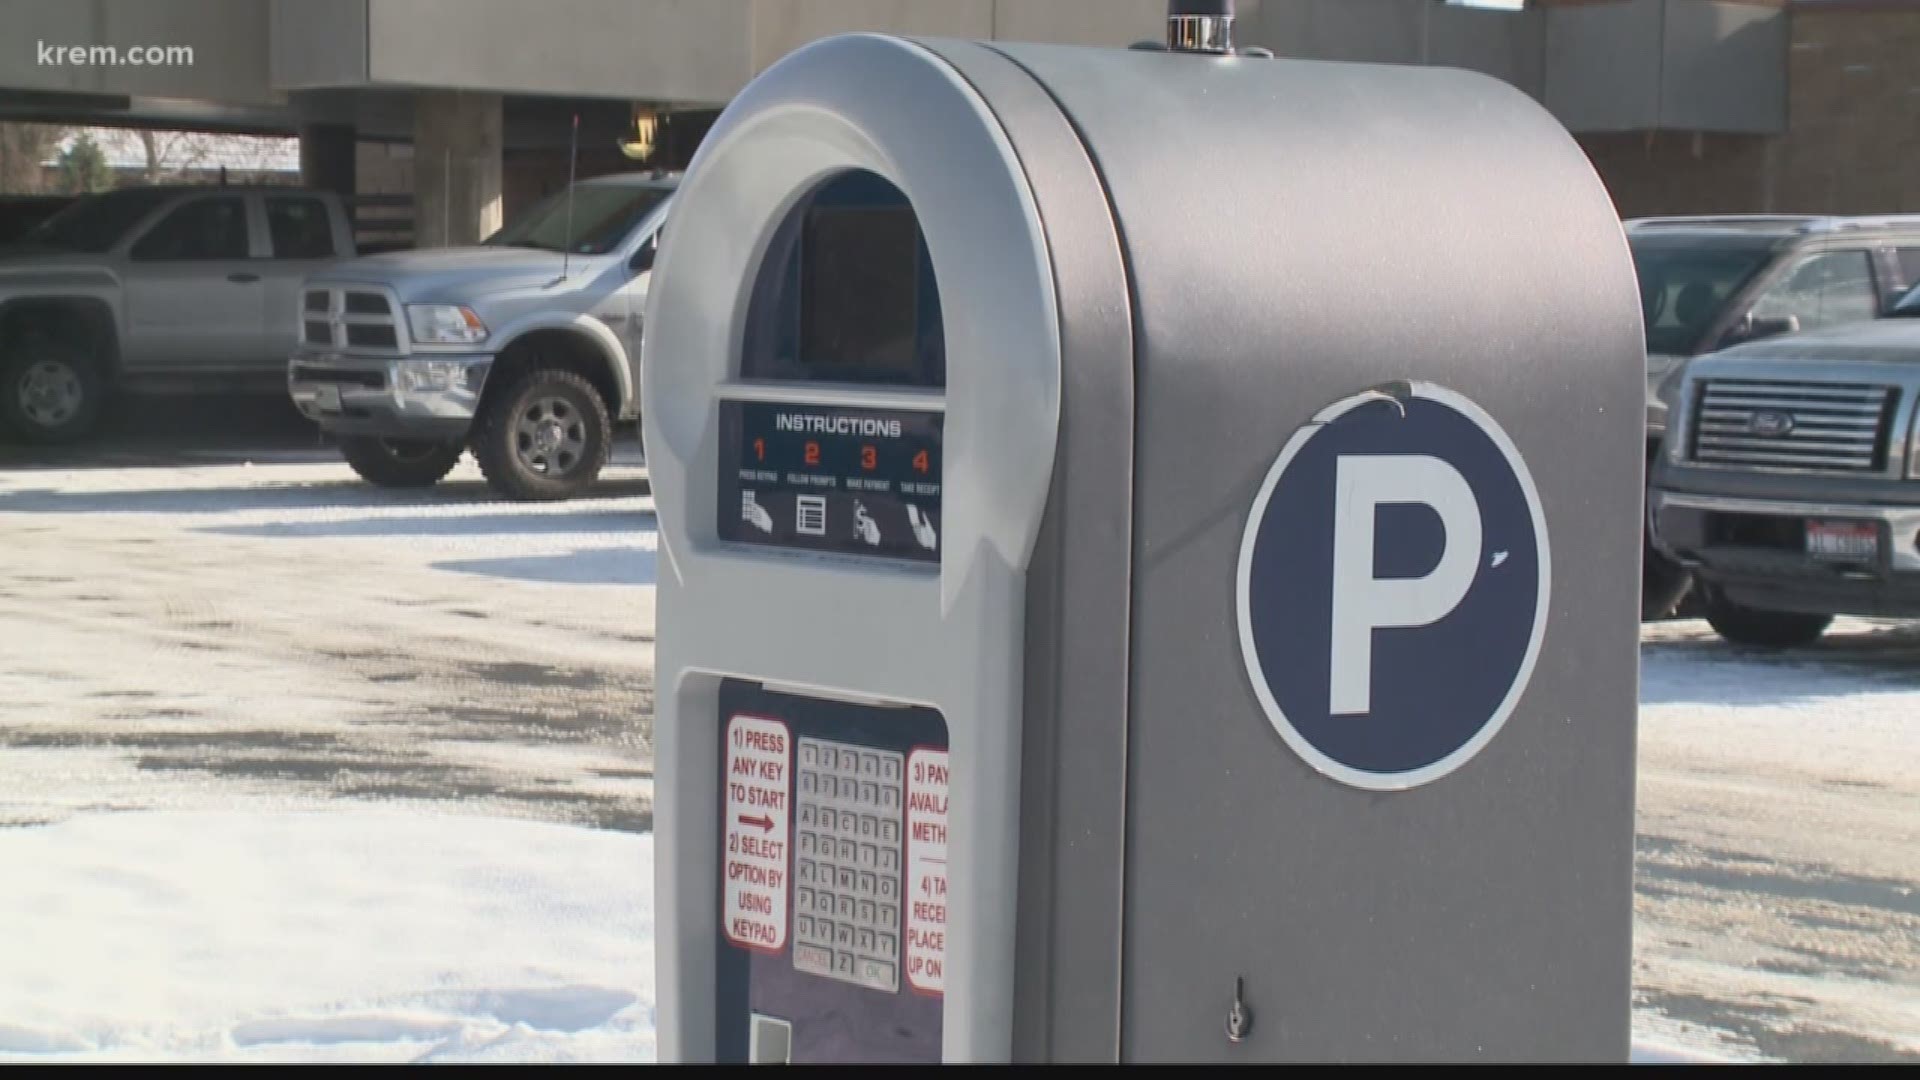 Parking near downtown Coeur d'Alene. It's a hot topic lately. The city says it plans to take away free parking at one popular lot because drivers there were getting too many parking tickets.